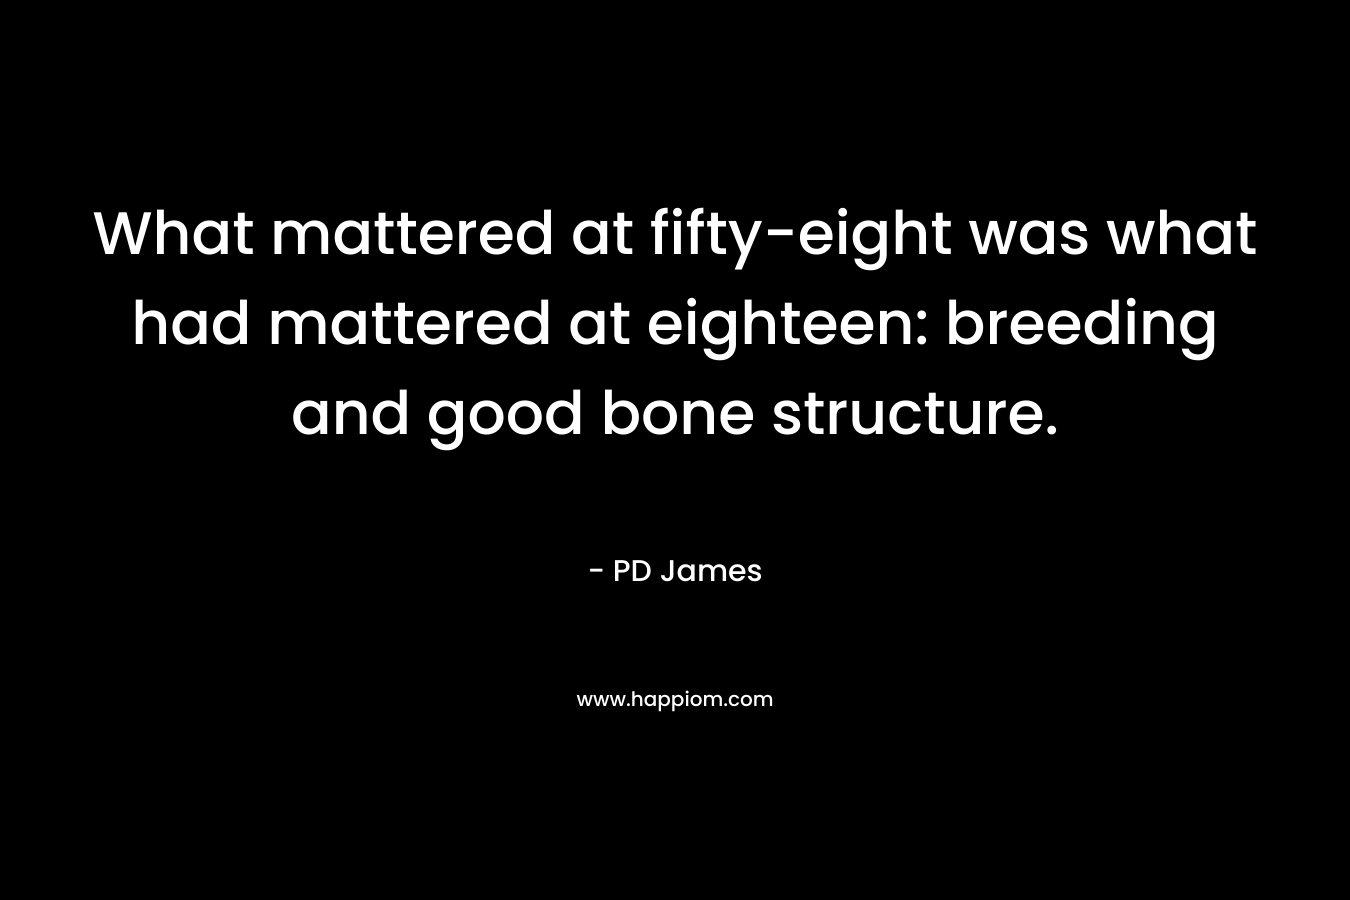 What mattered at fifty-eight was what had mattered at eighteen: breeding and good bone structure. – PD James